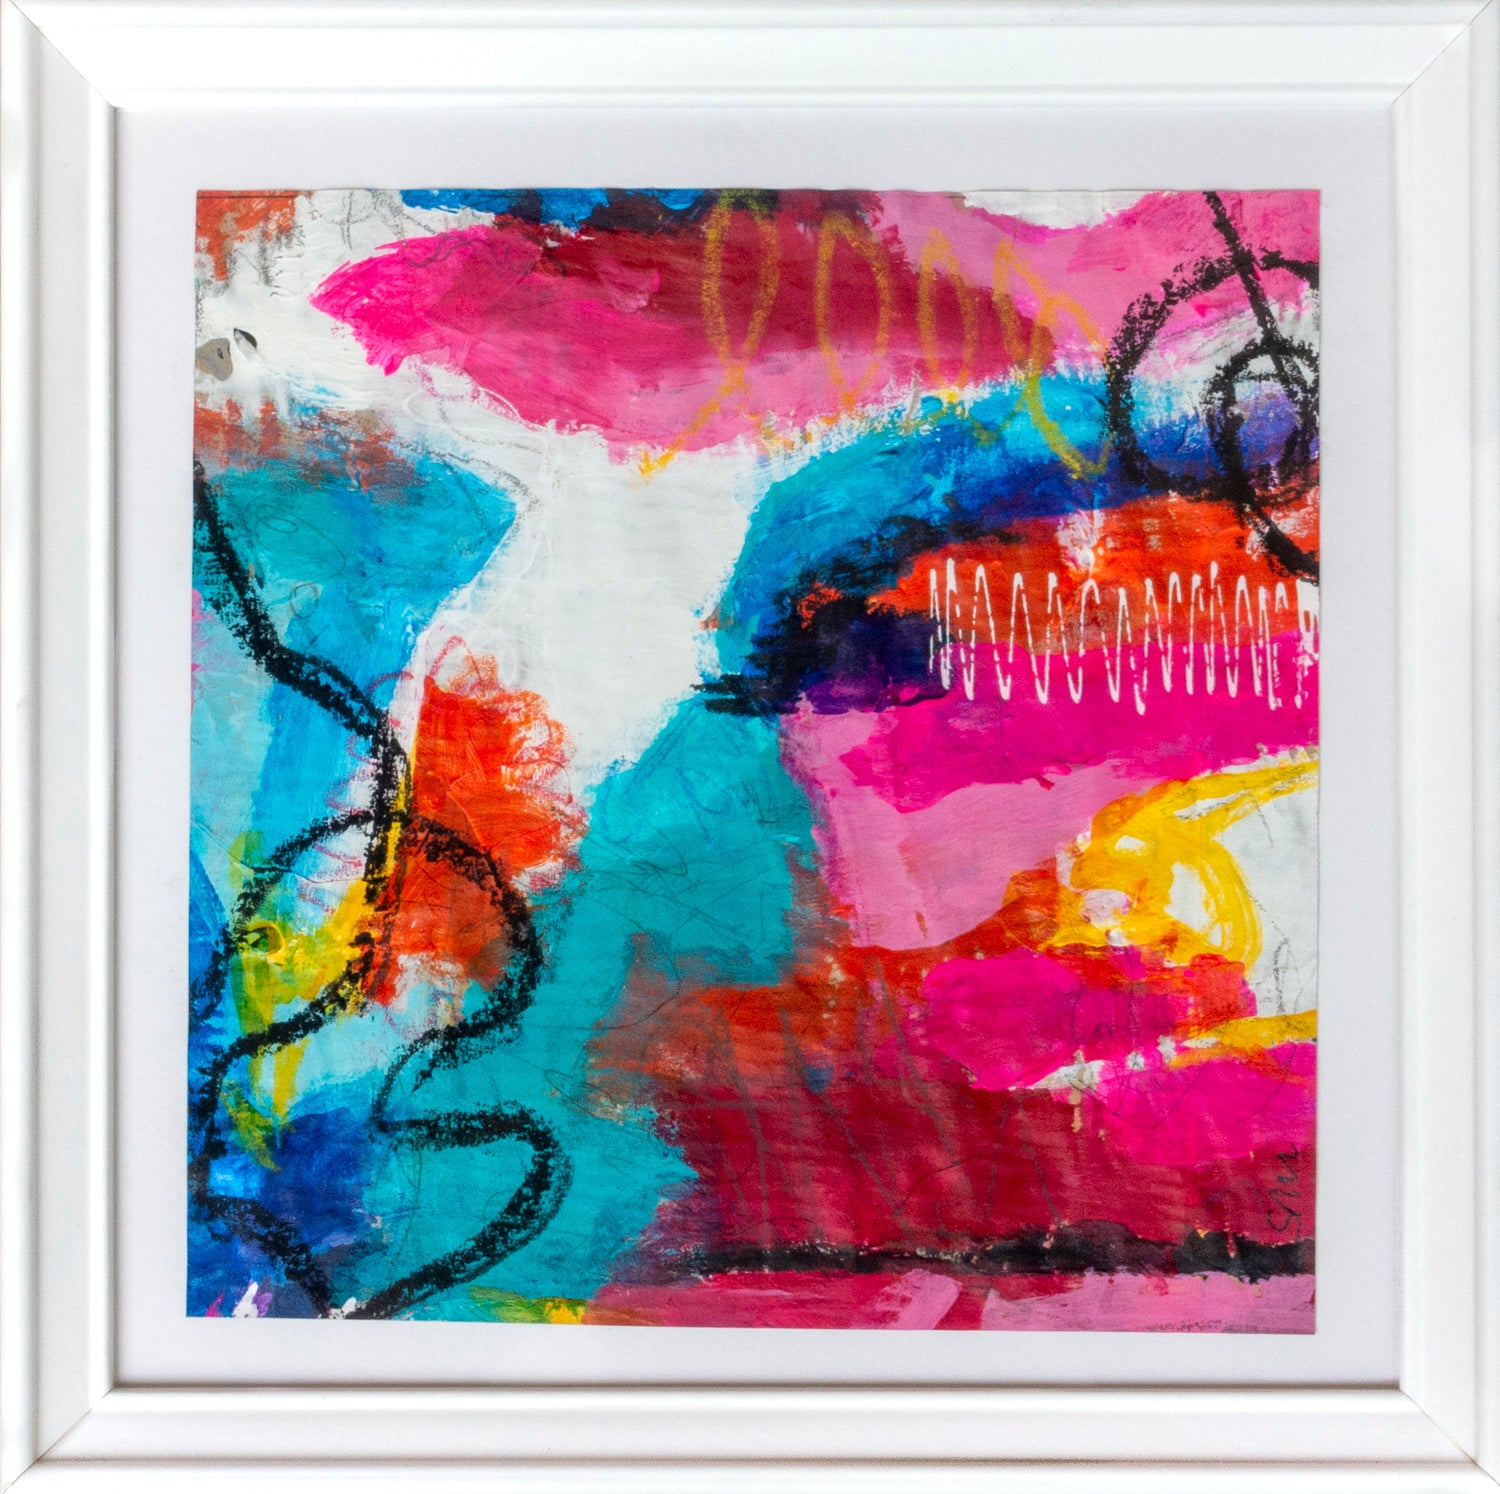 Colorful acrylic abstract painting on paper titled 'Part of the Whole #14' by artist Steffi Möllers; measures app 7.5"x7.5"; w/frame measures 10"x10"